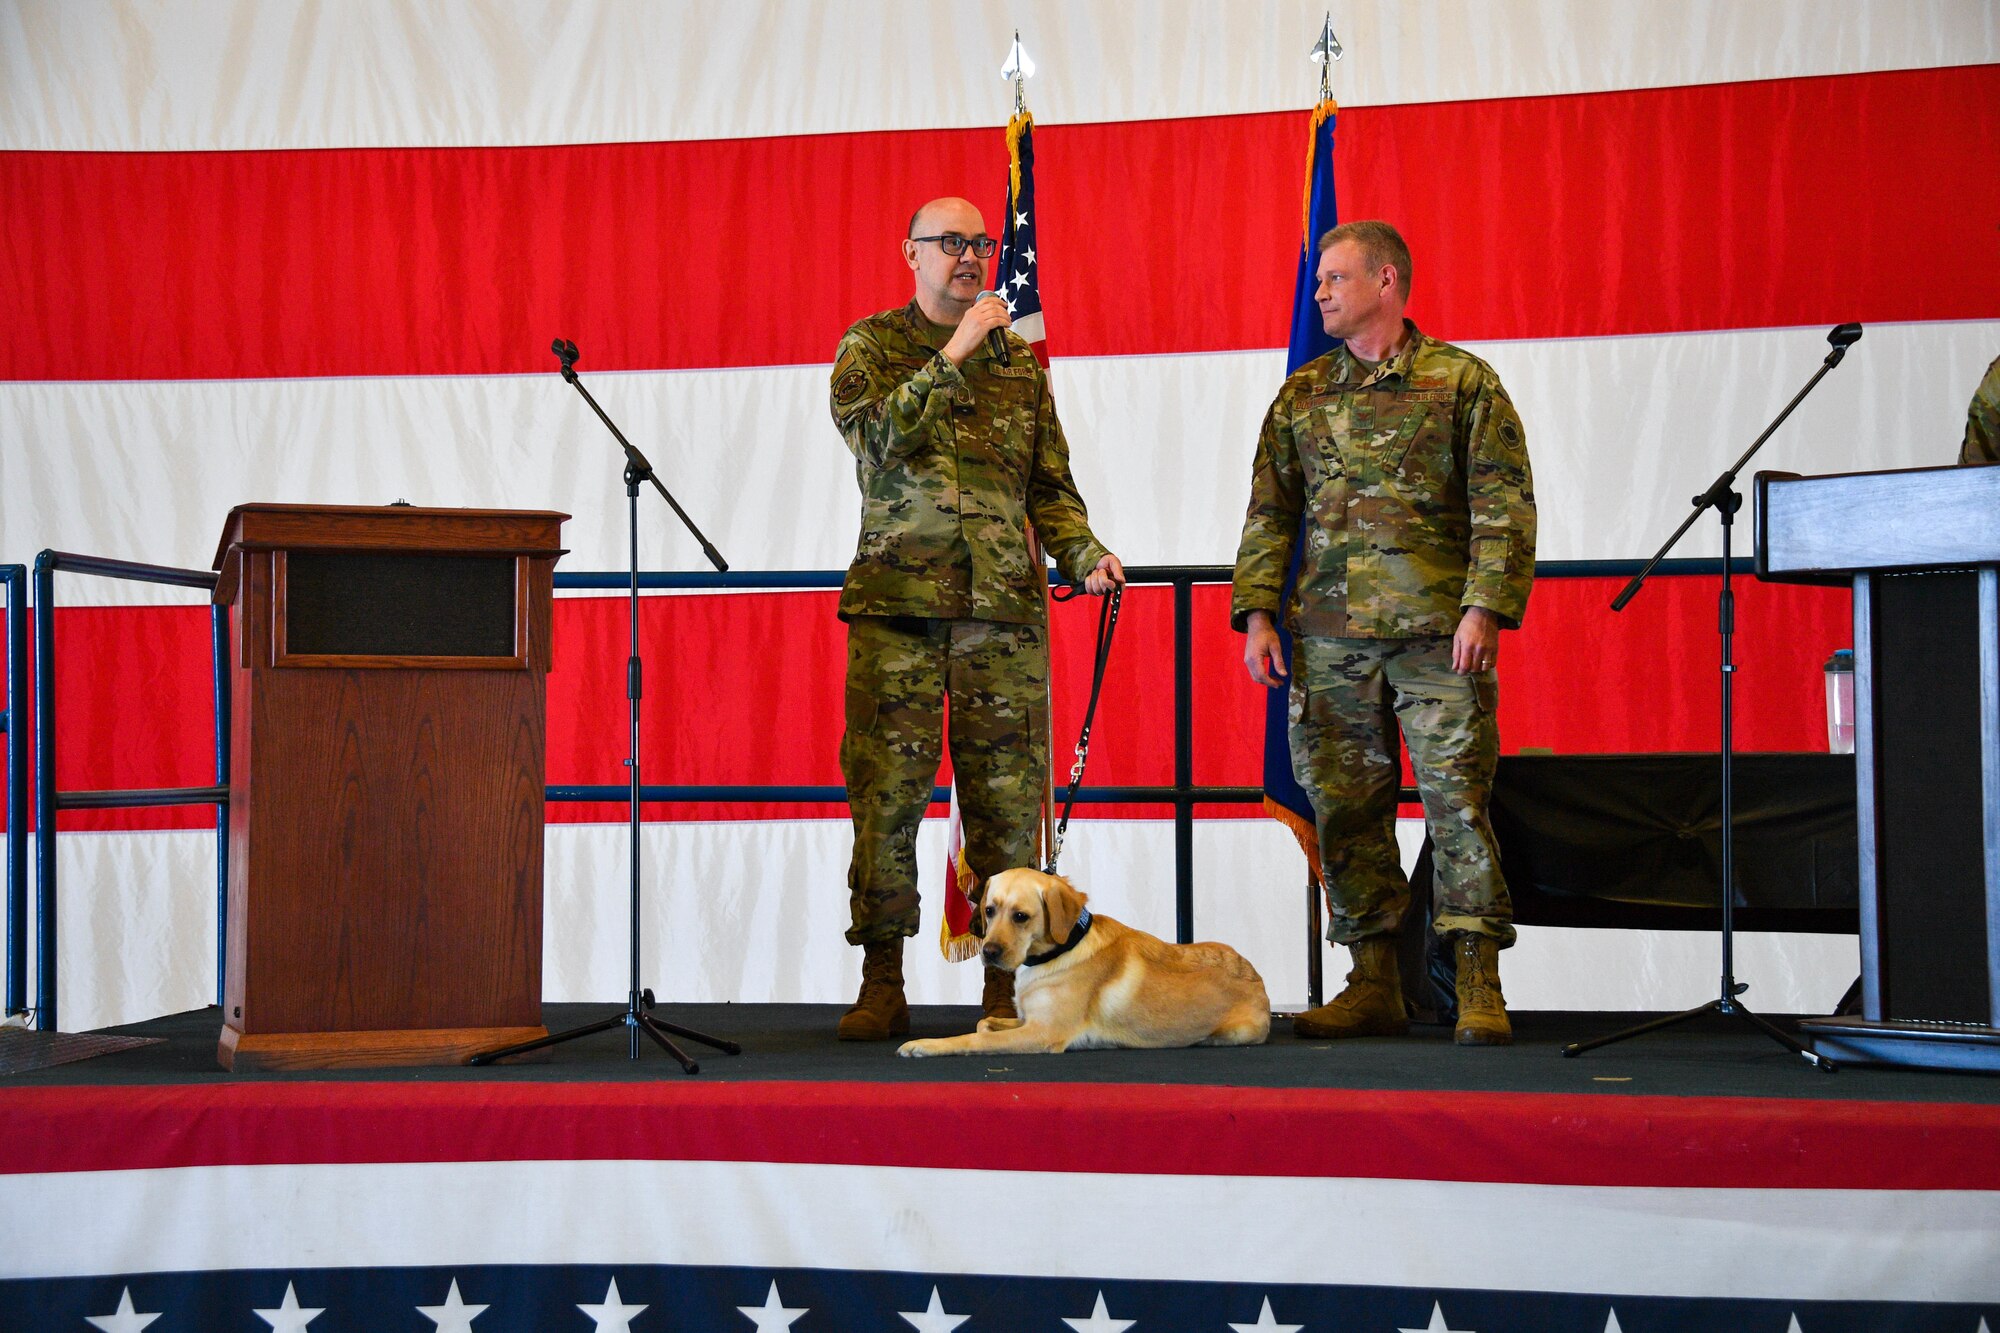 Senior Master Sgt. Jim Harper, 301st Fighter Wing Mental Health Specialist, and Col. Allen Duckworth, 301st Fighter Wing Commander, speaks to an audience at Naval Air Station Joint Reserve Base Fort Worth, Texas on April 03, 2022. Col. Duckworth introduced Dallas, 301 FW therapy dog, to the wing. (U.S. Air Force photo by Staff Sgt. Nije Hightower)